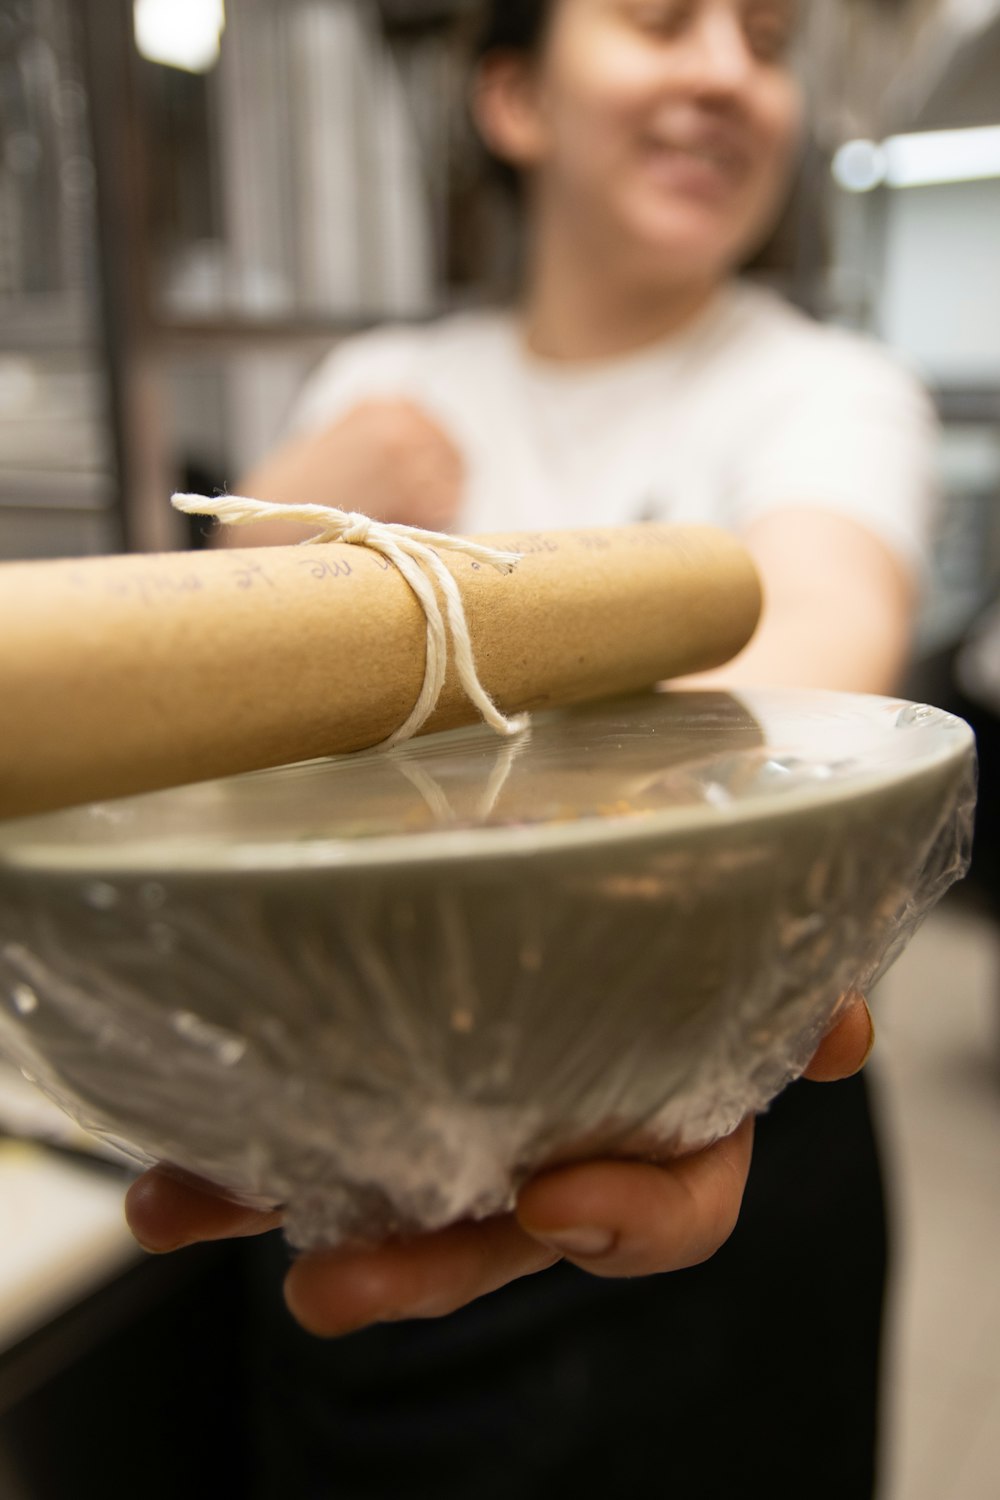 a woman is holding a bowl with a rolling pin in it